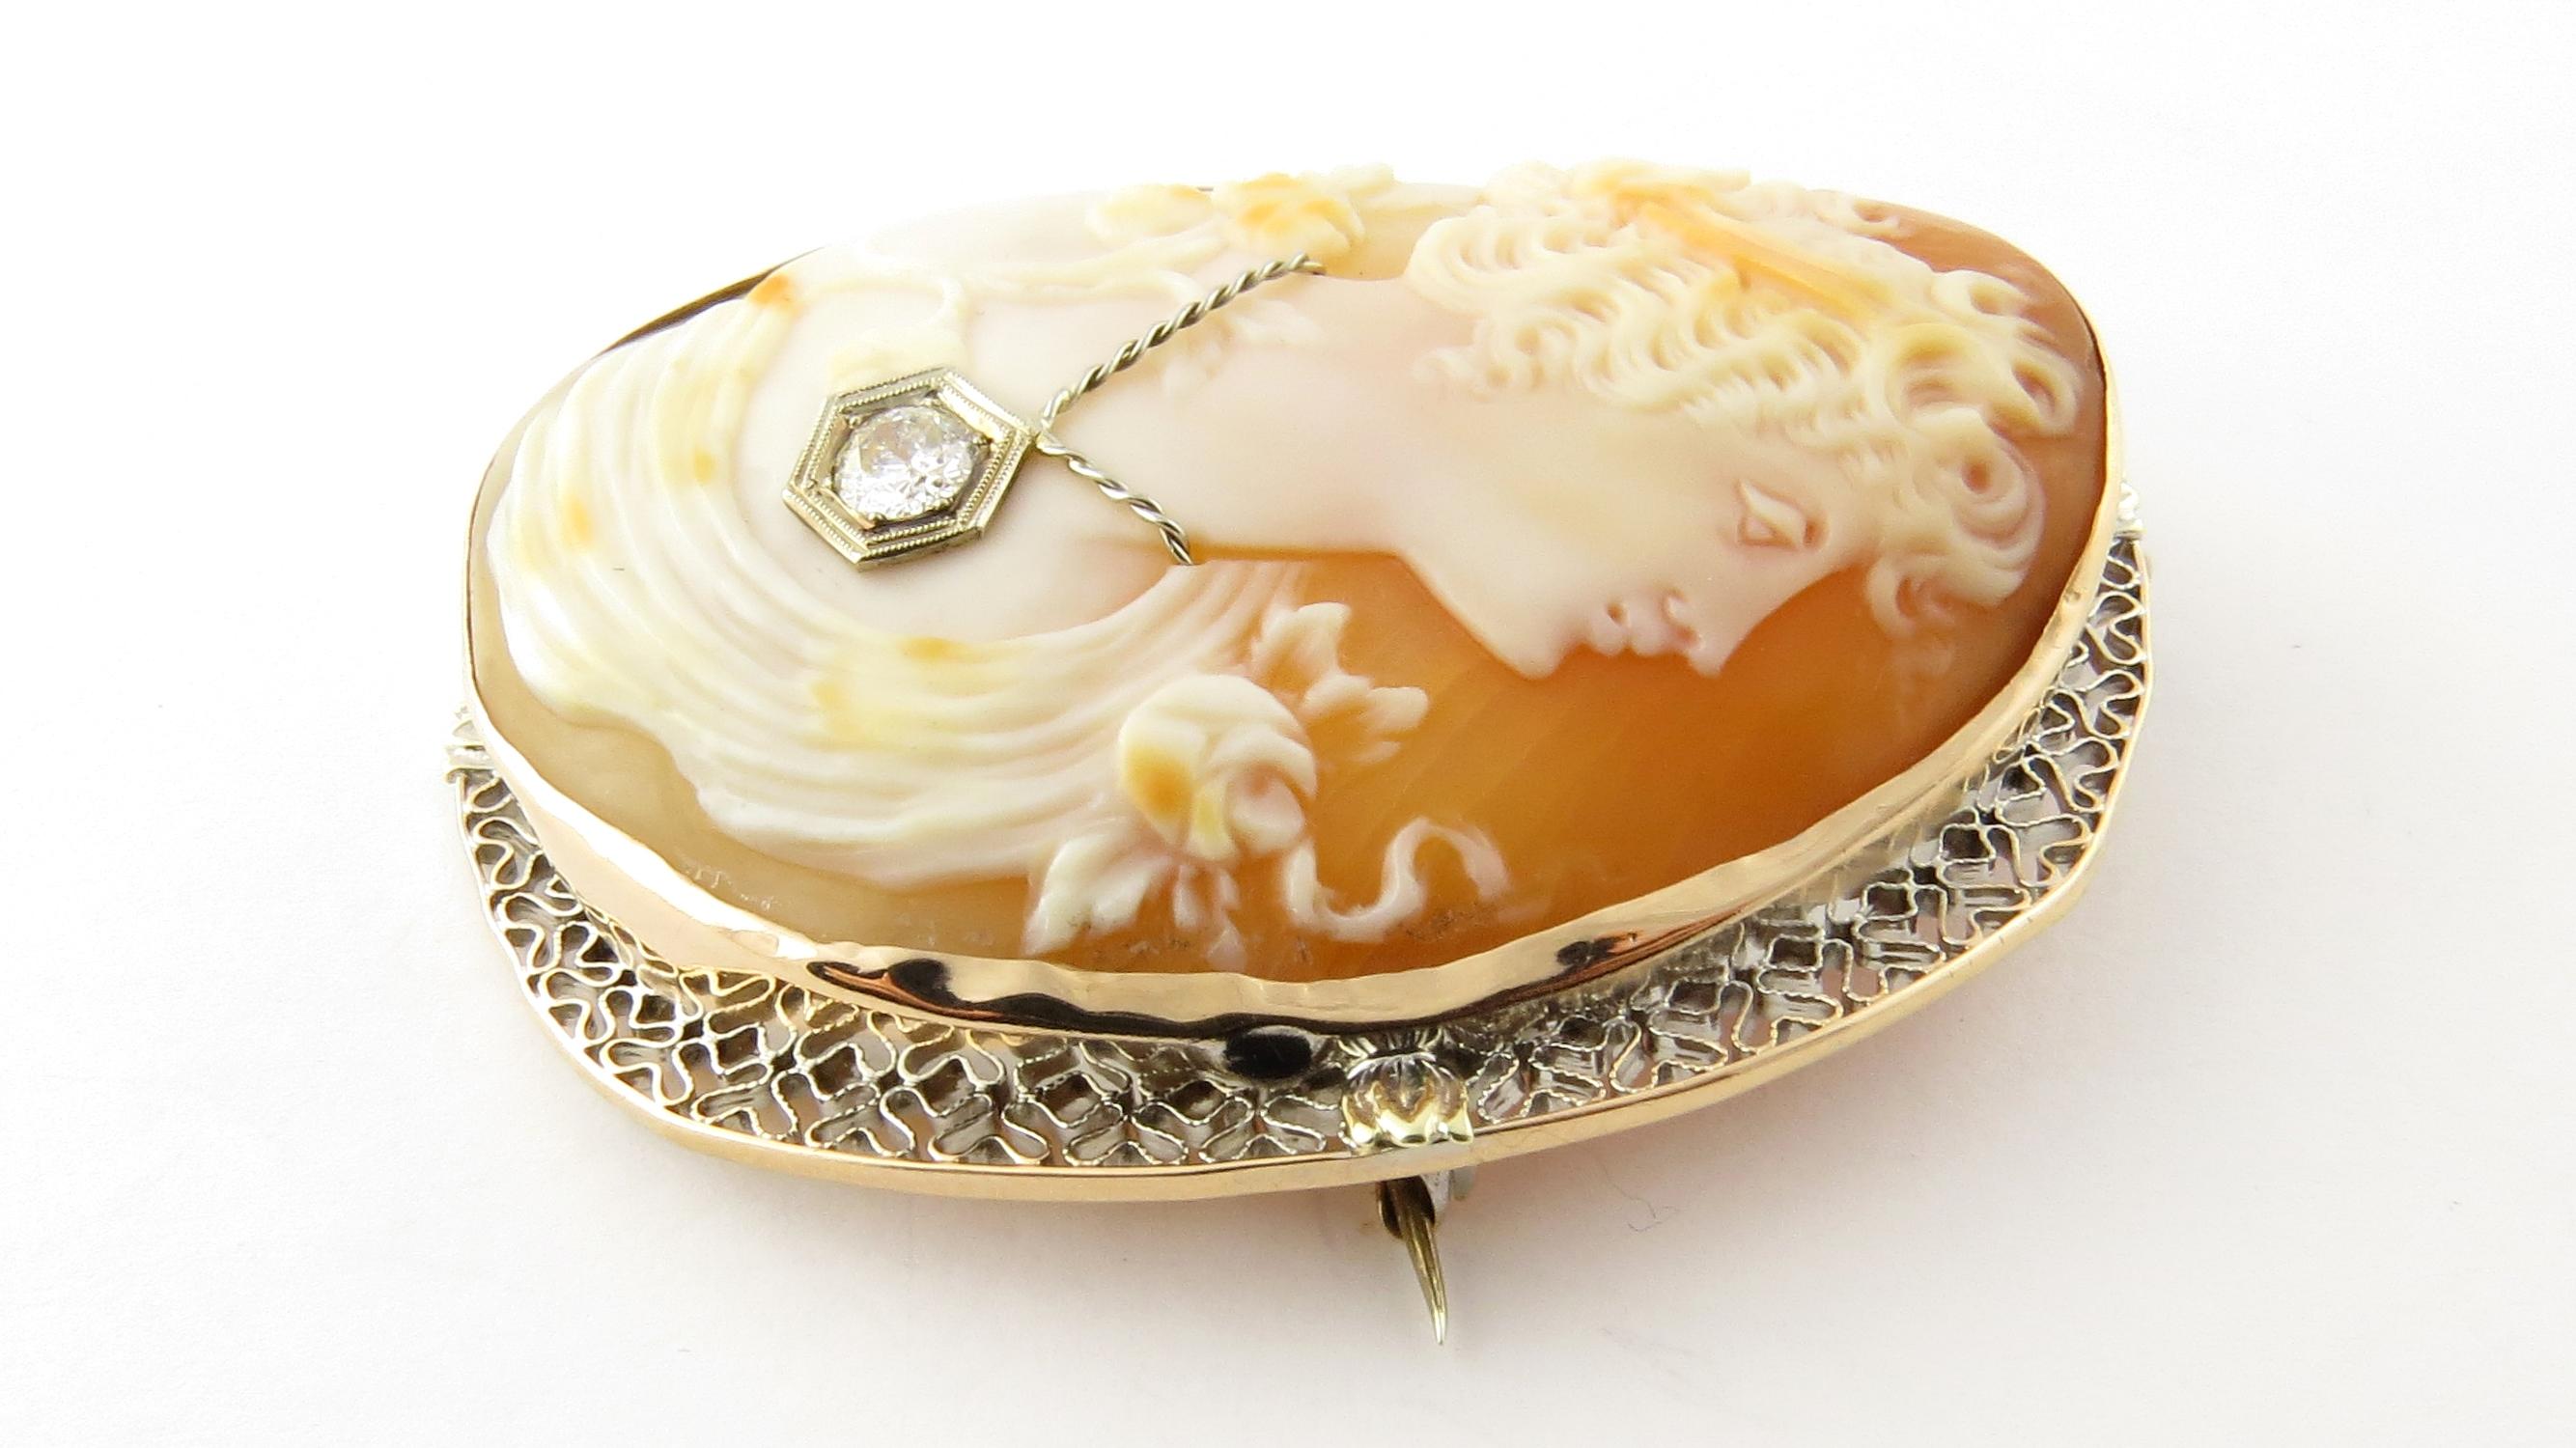 Vintage 14 Karat Yellow Gold and Diamond Cameo Brooch/Pendant

This stunning cameo features a lovely lady in profile accented with one round European cut diamond framed in delicate 14K yellow gold filigree. Can be worn as a brooch or a